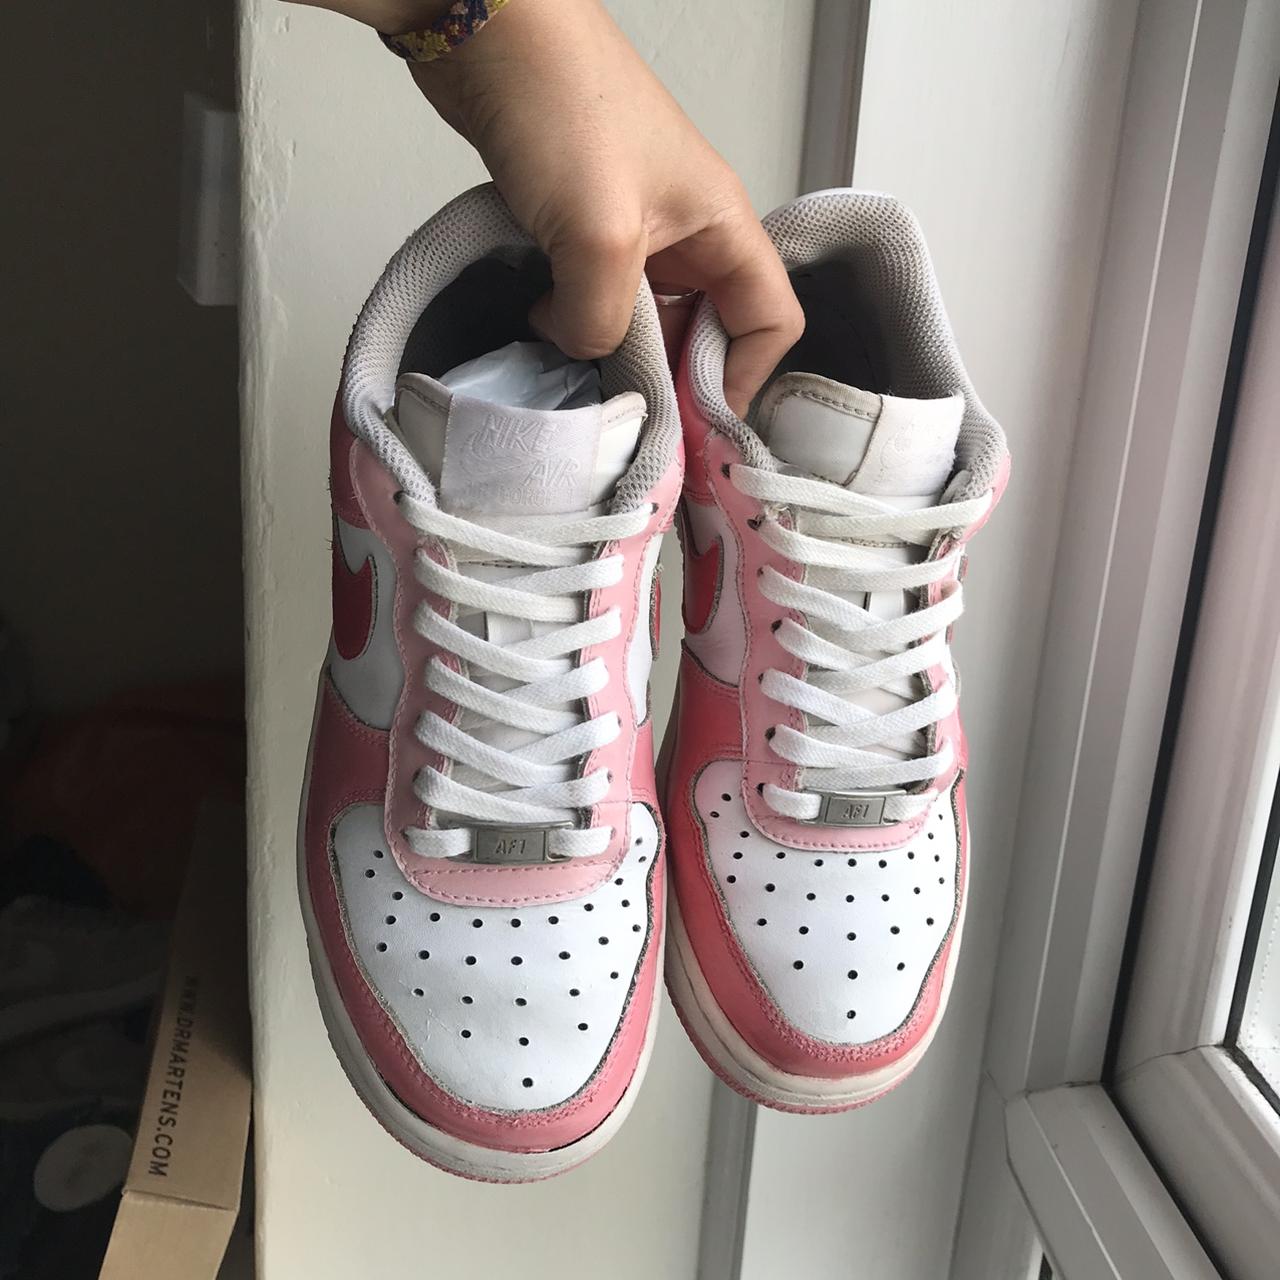 Sold out! NIKE AIR FORCE 1 - baby pink custom £90 - Depop